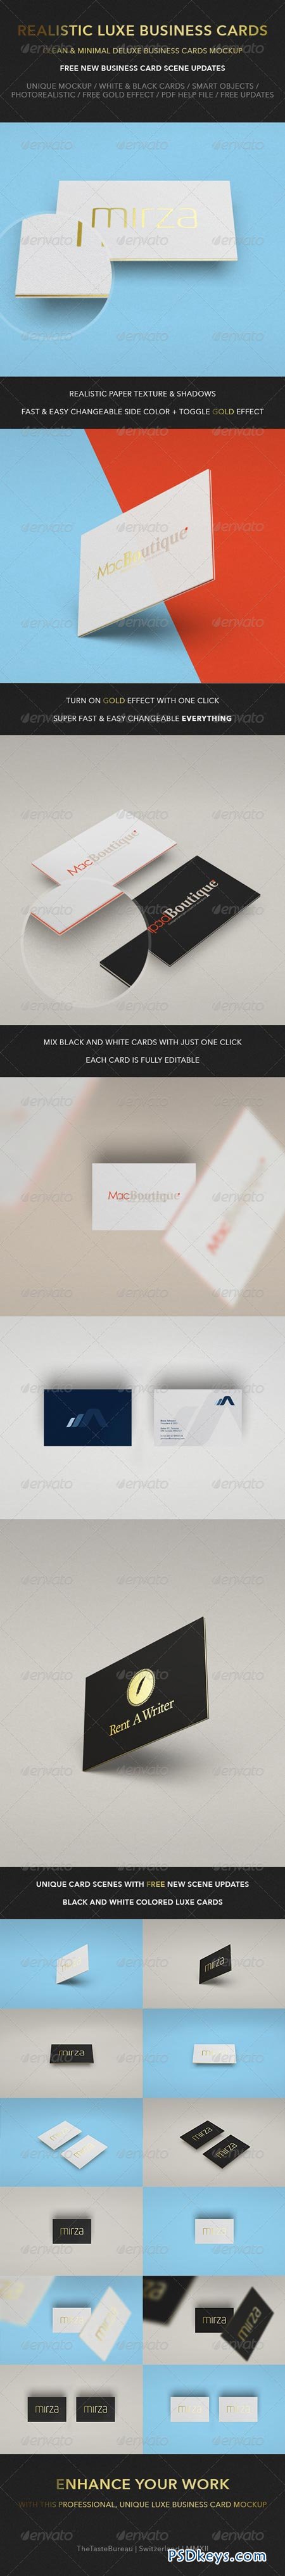 Realistic Luxe Business Card Mock-Up 6507623